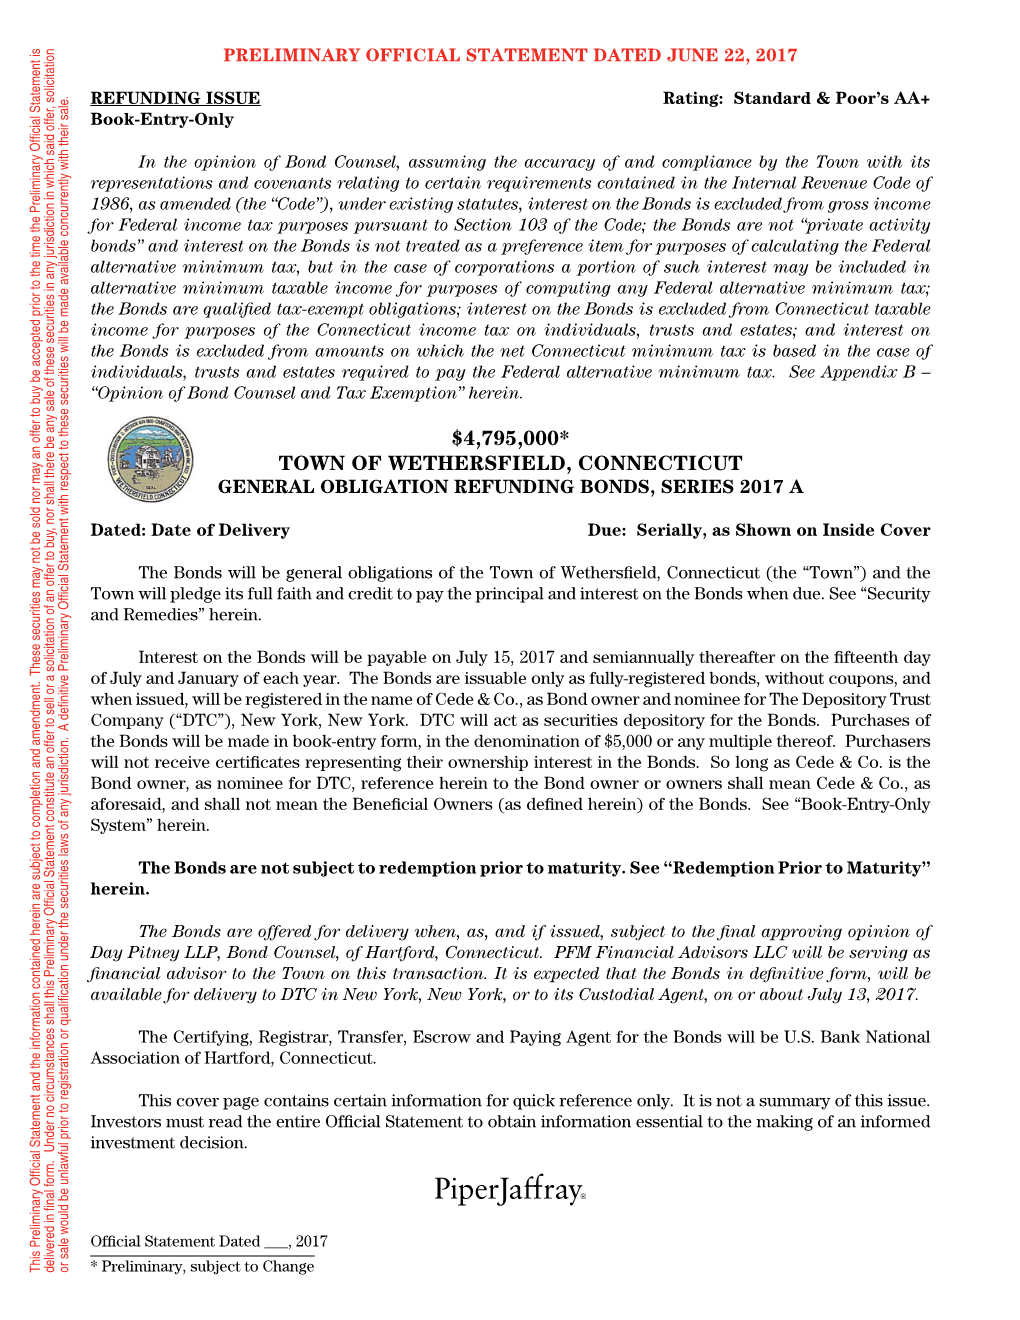 Town of Wethersfield, Connecticut General Obligation Refunding Bonds, Series 2017 A